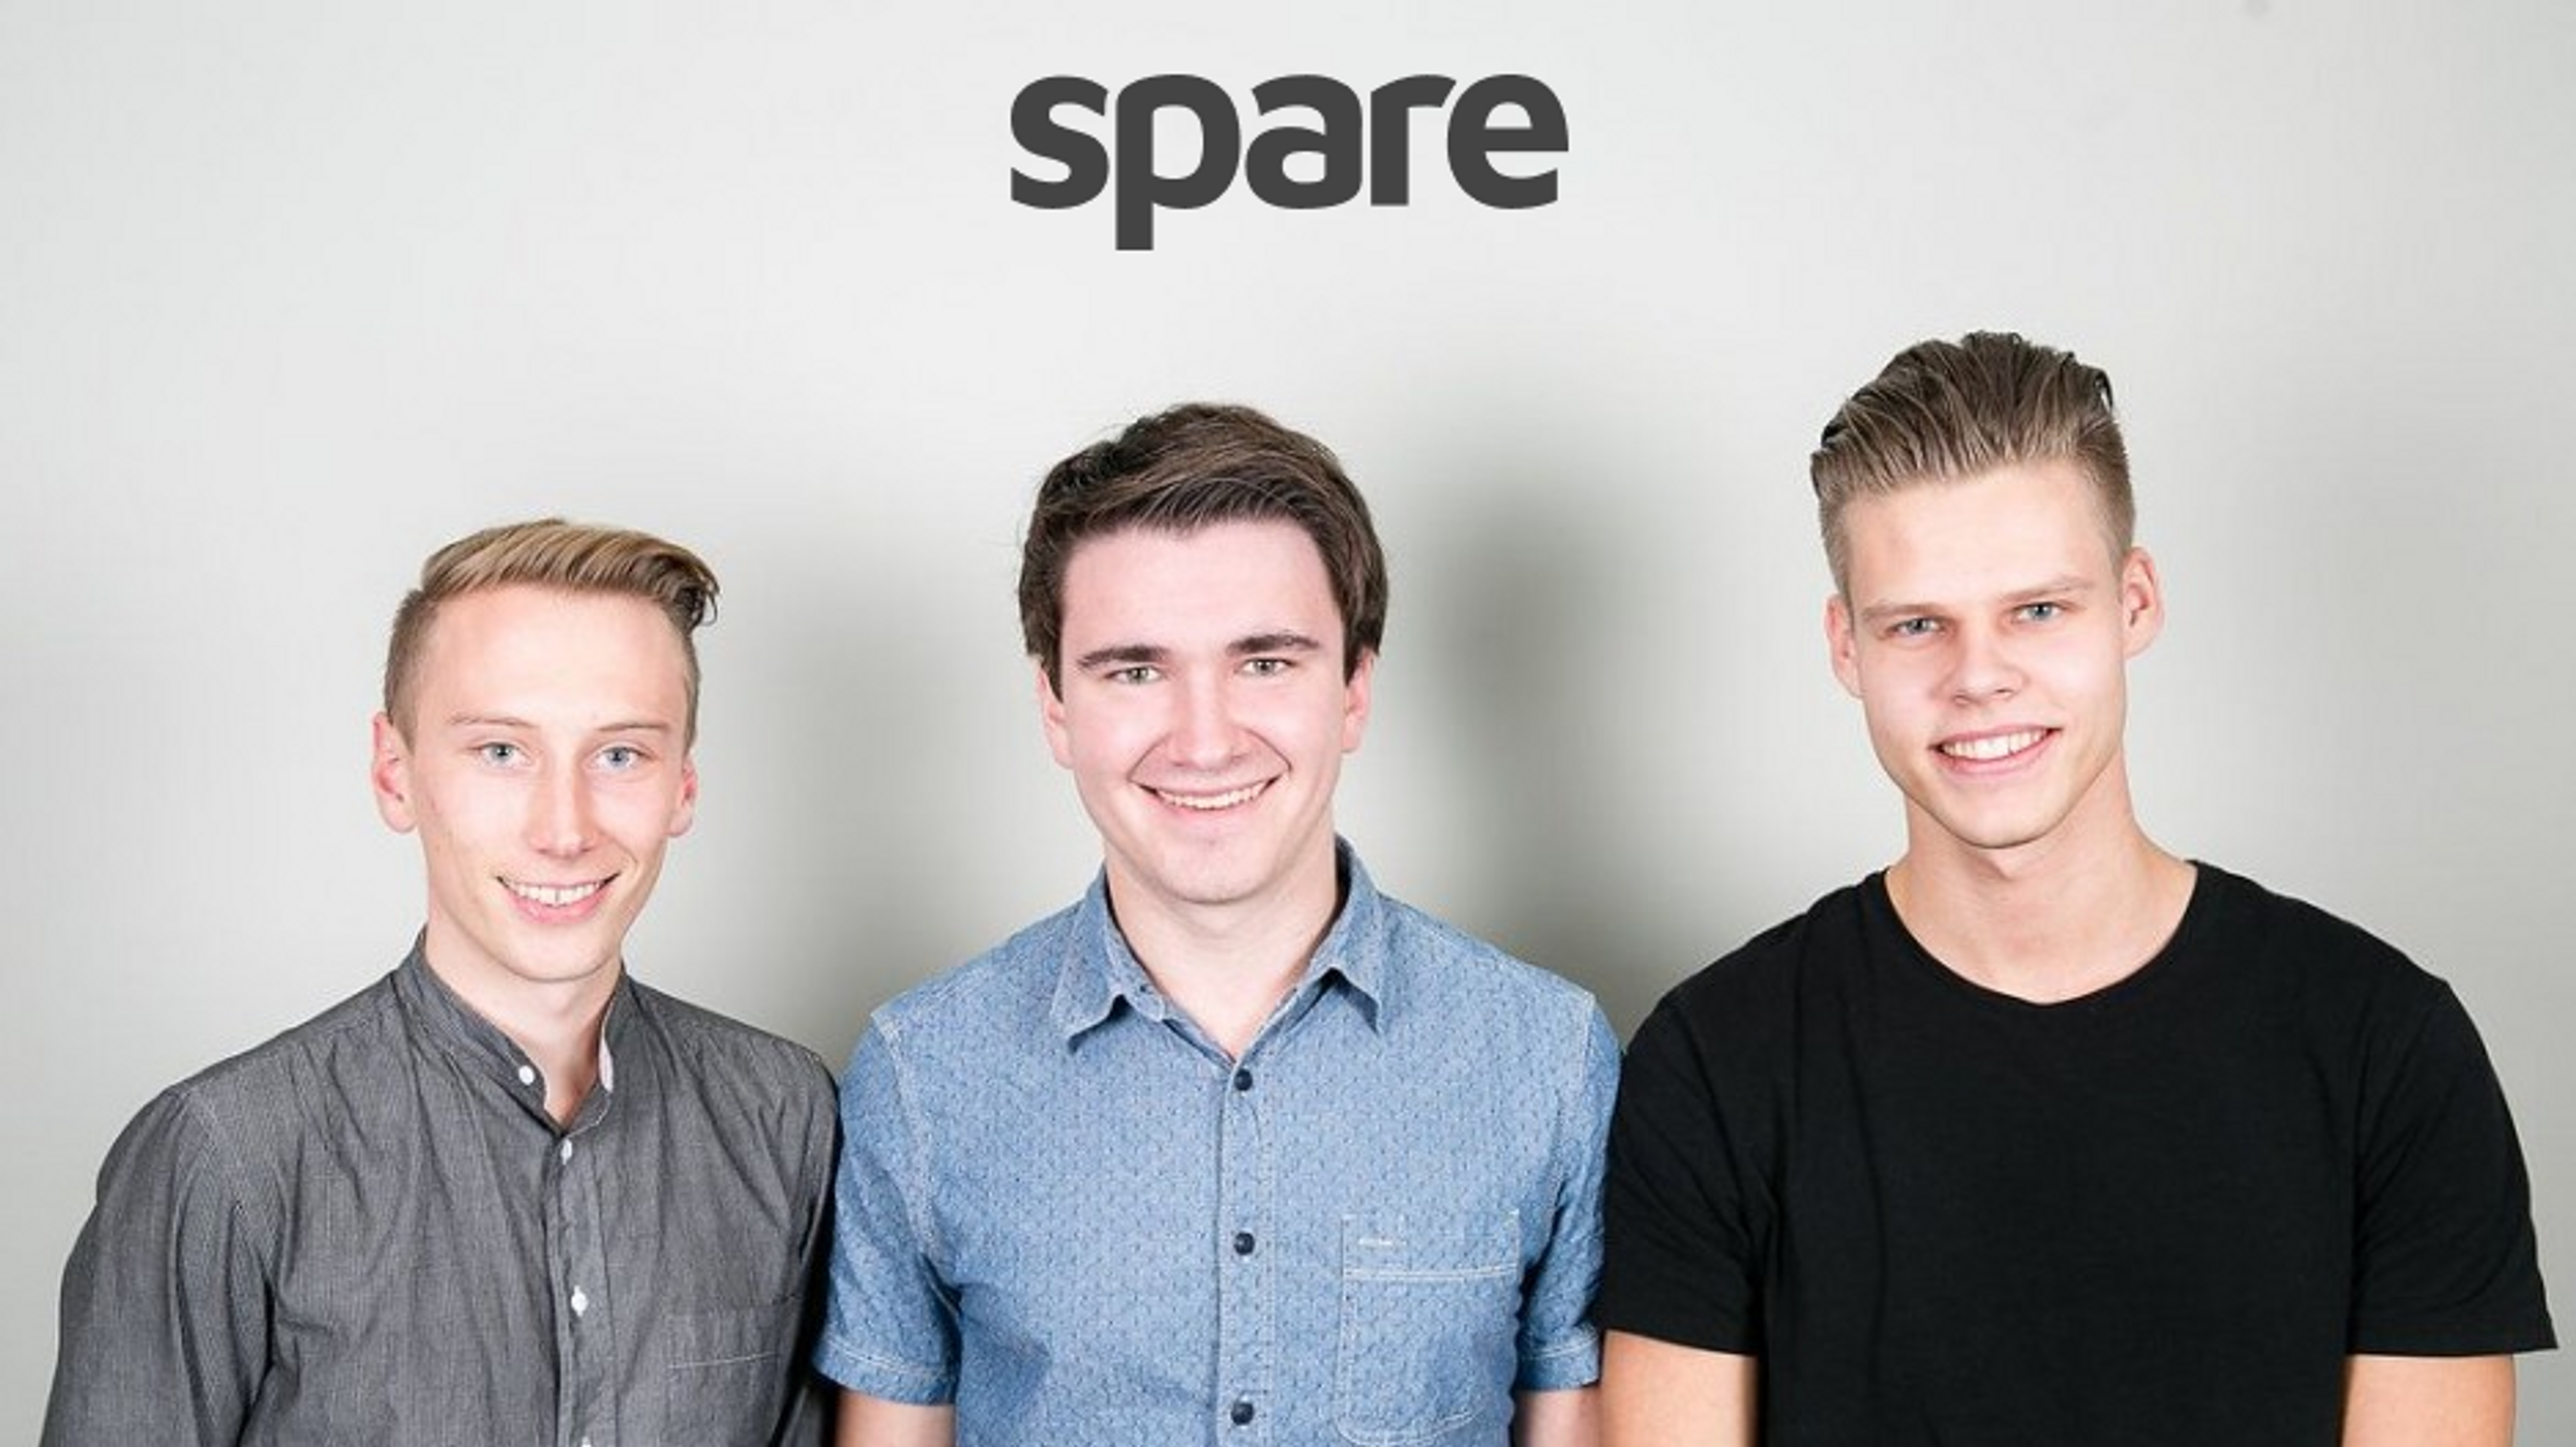 Spare's founders